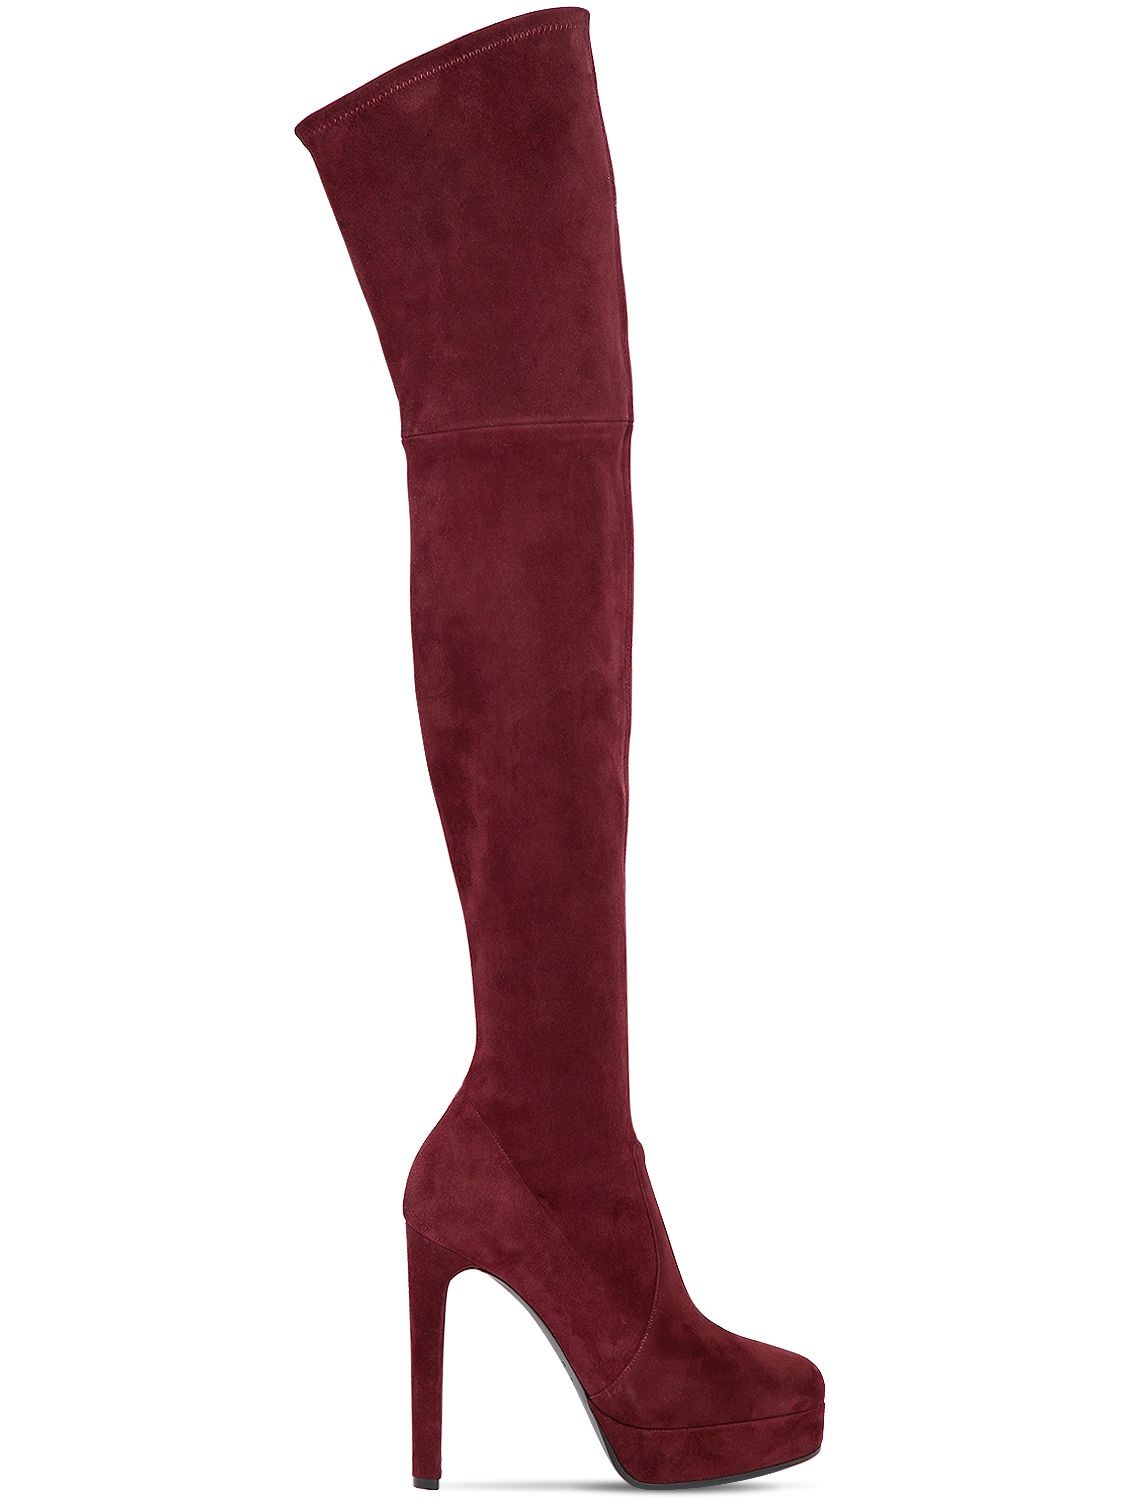 CASADEI 120MM STRETCH SUEDE OVER THE KNEE BOOTS,68IAIM001-NZUX0